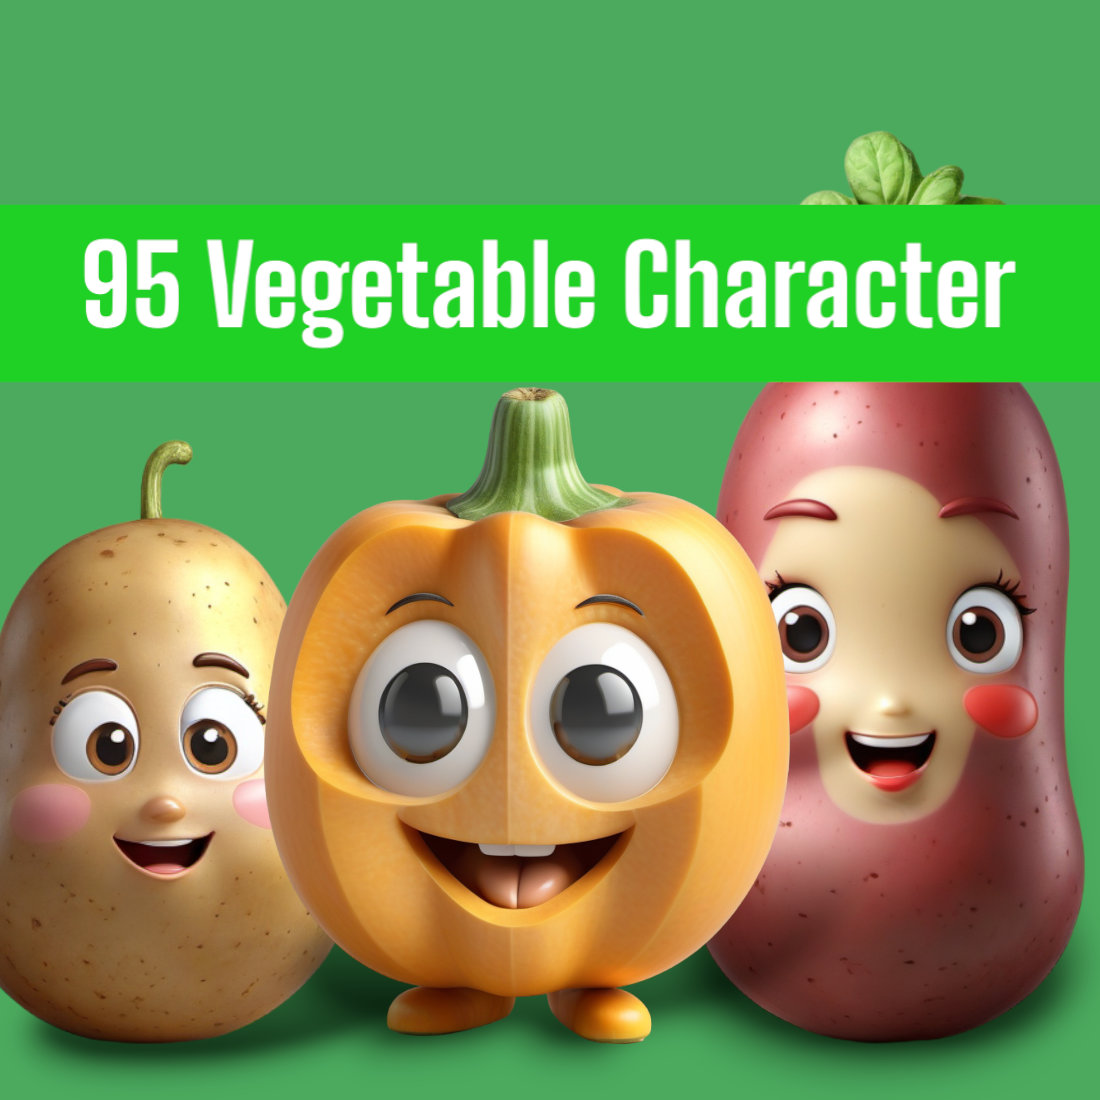 95 Vegetable Character 3d illustration preview image.